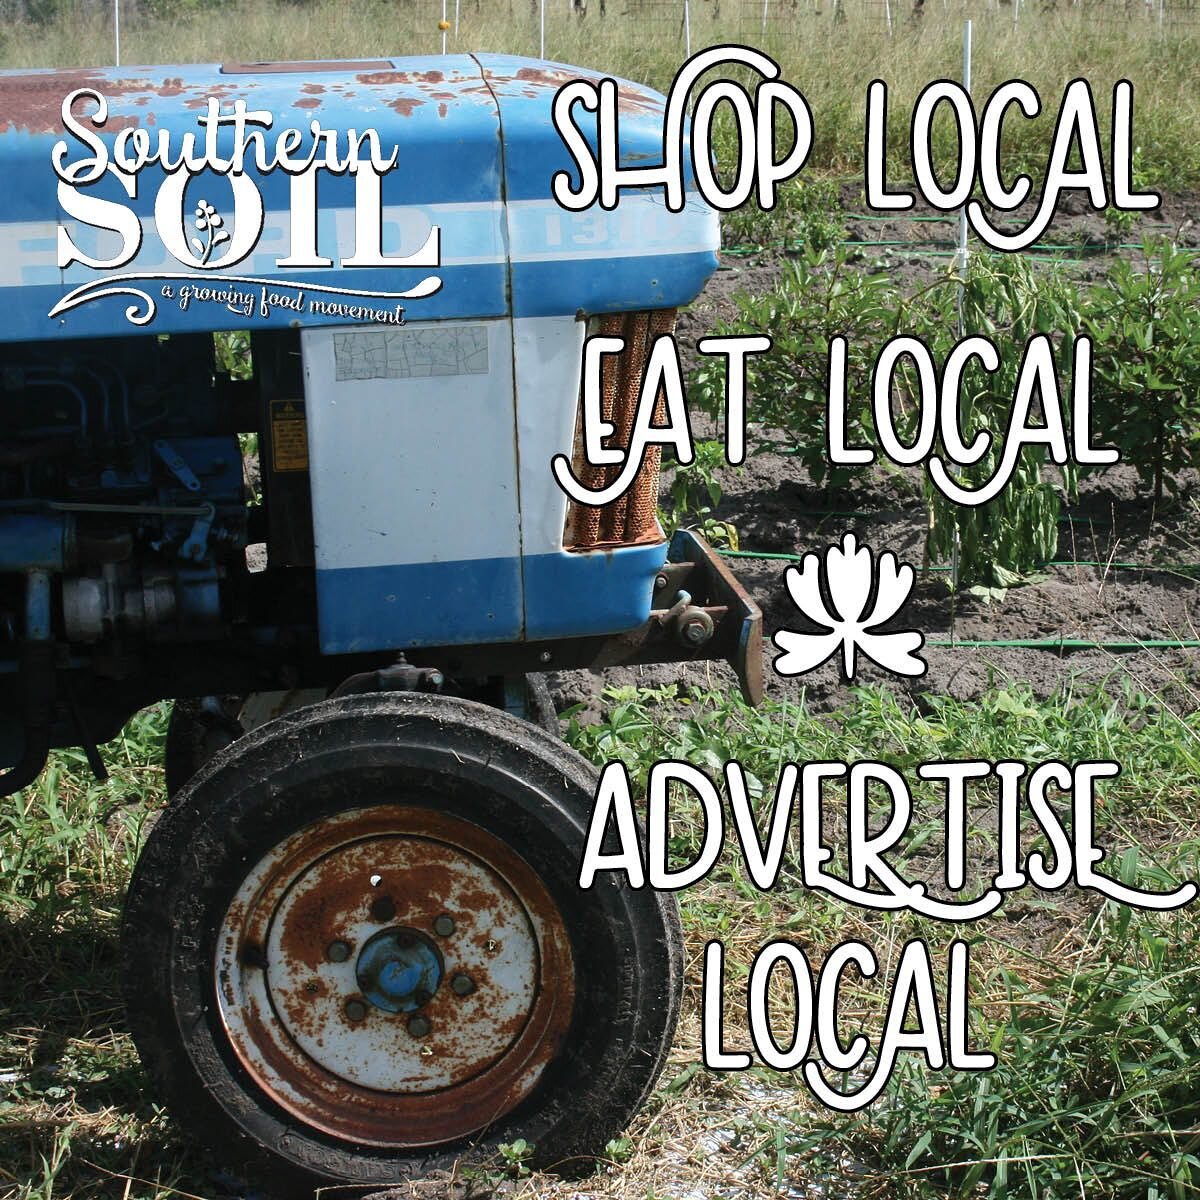 We have sponsorship/advertising opportunities coming up! Contact today for more information: info@southernsoil.org or 912-688-4168

Fall Issue 2022 - We will publish this final digital issue of 2022 in late October! (Ad deadline is October 7)

PRINTE